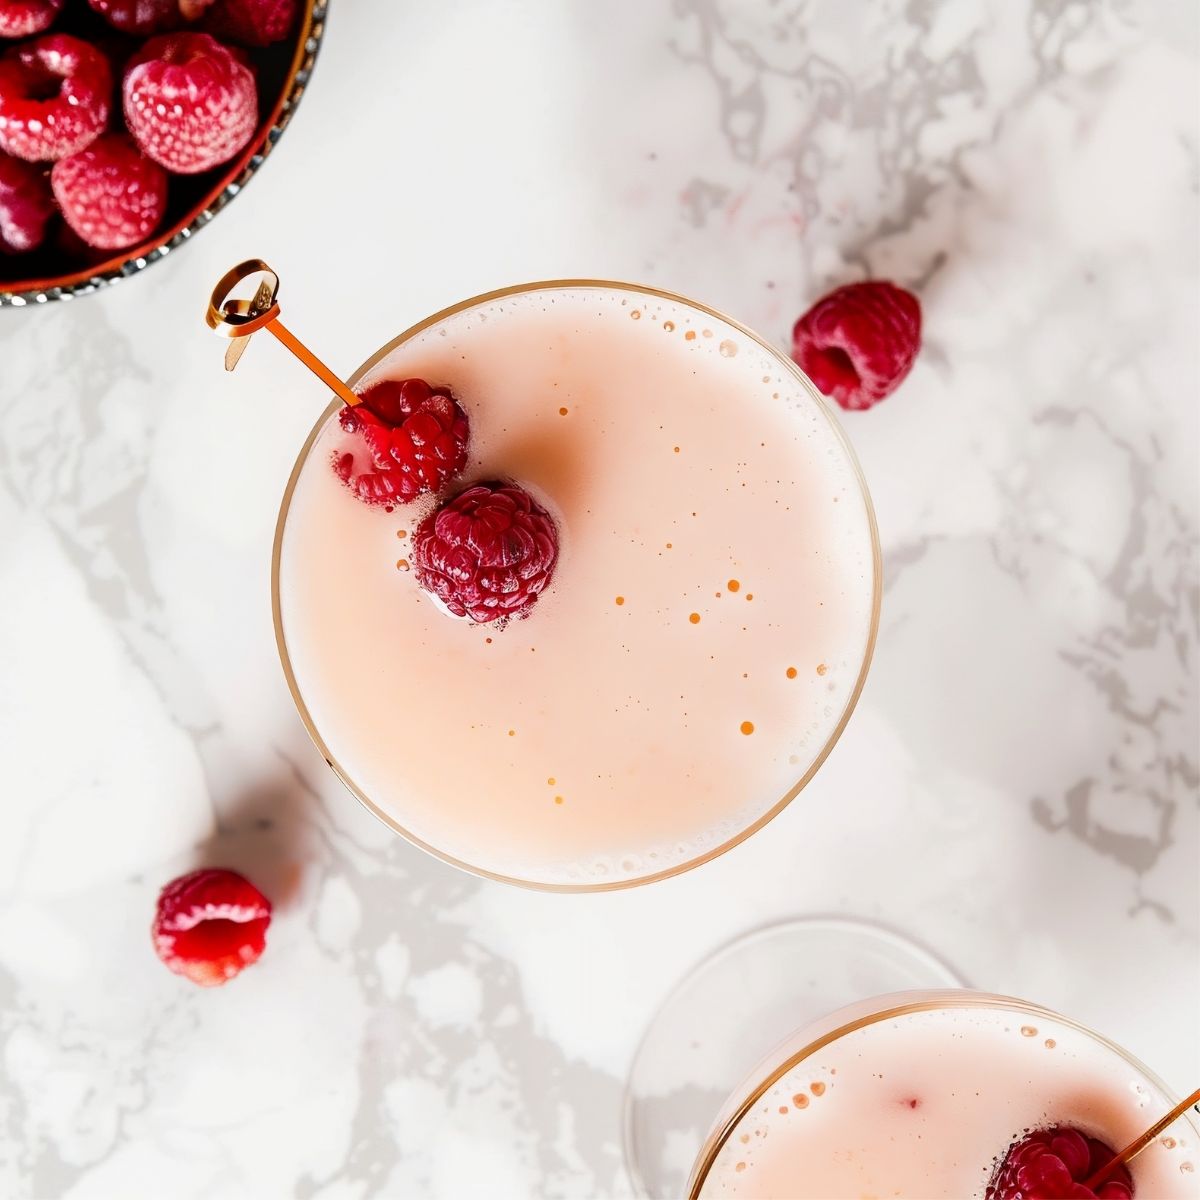 Top View of Two Foamy French Martinis with Raspberries for Garnish on a White Marble Table with a Bowl of Raspberries